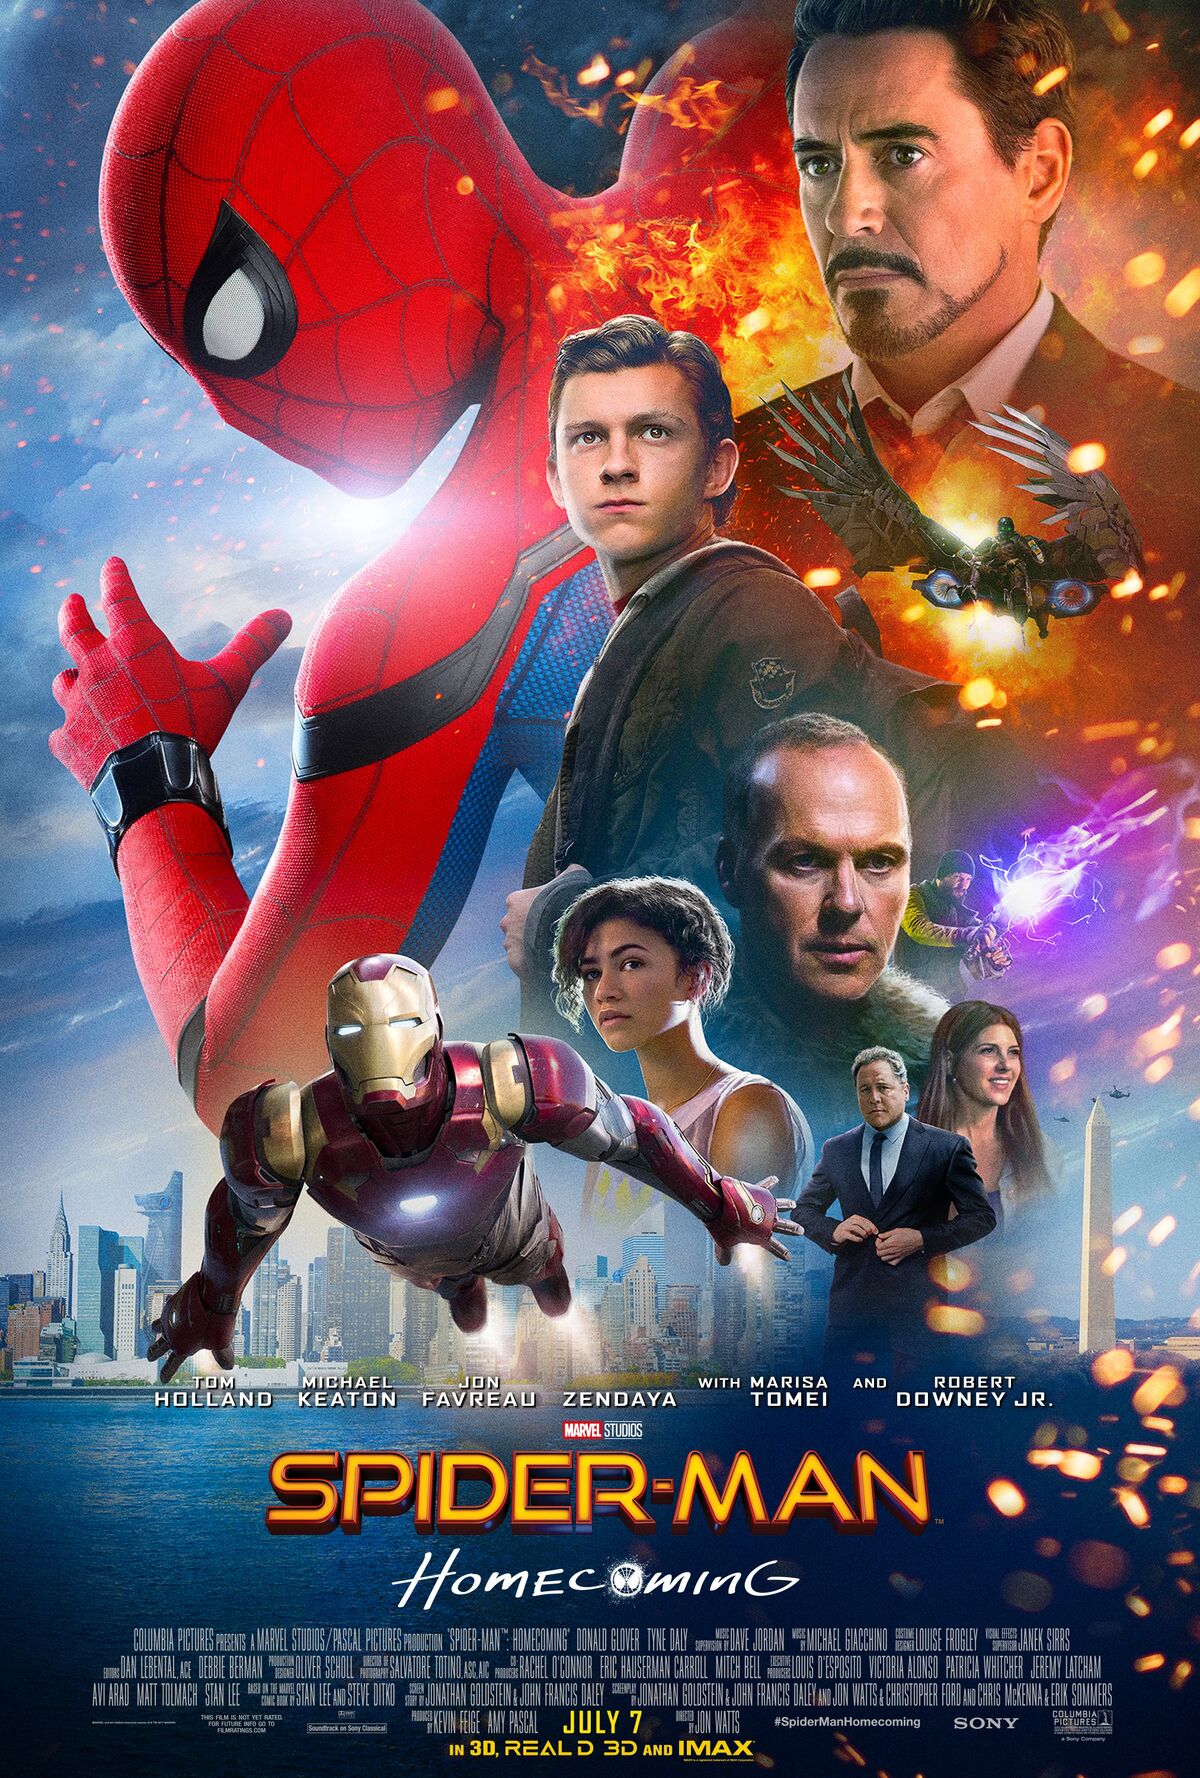 Spider-Man: No Way Home' (2021) - This live-action film by Jon